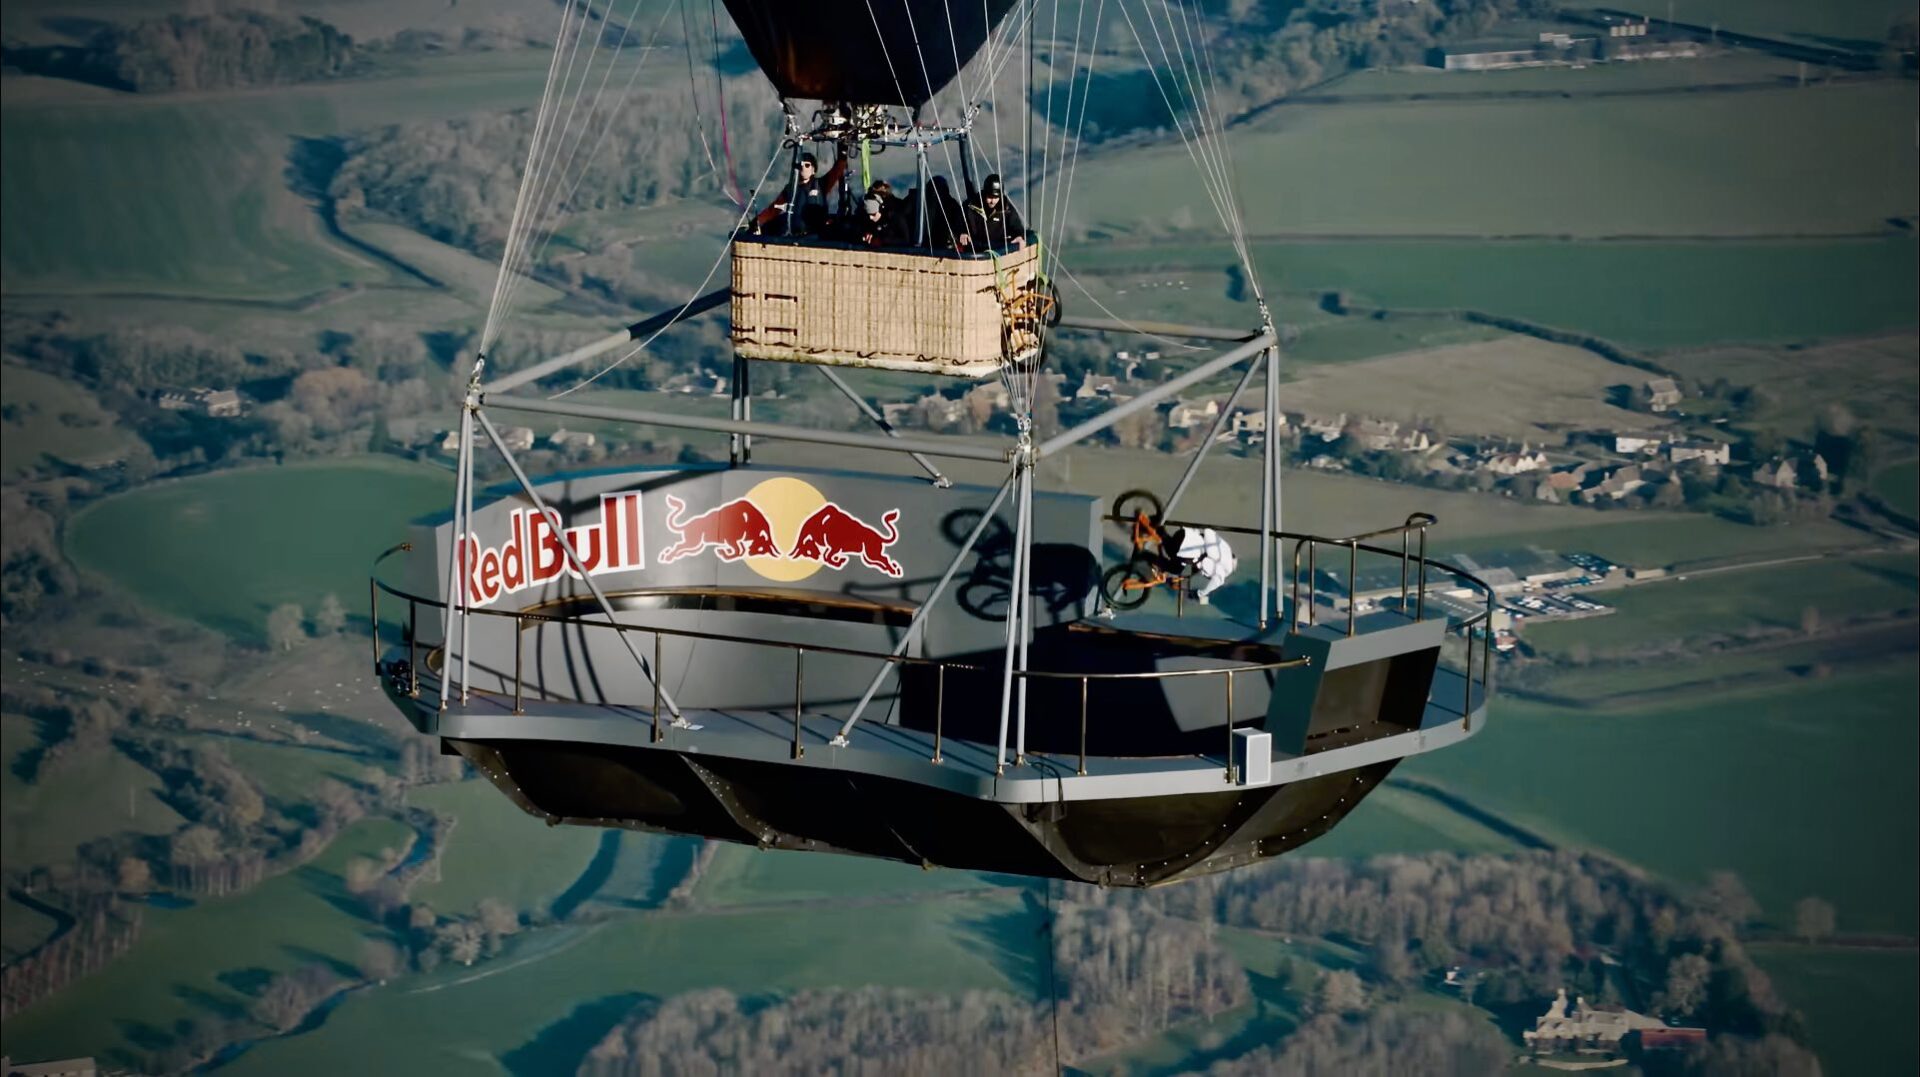 A Photo of BMX Rider Kris Kyle performing stunts in a BMX bowl suspended from a hot air balloon